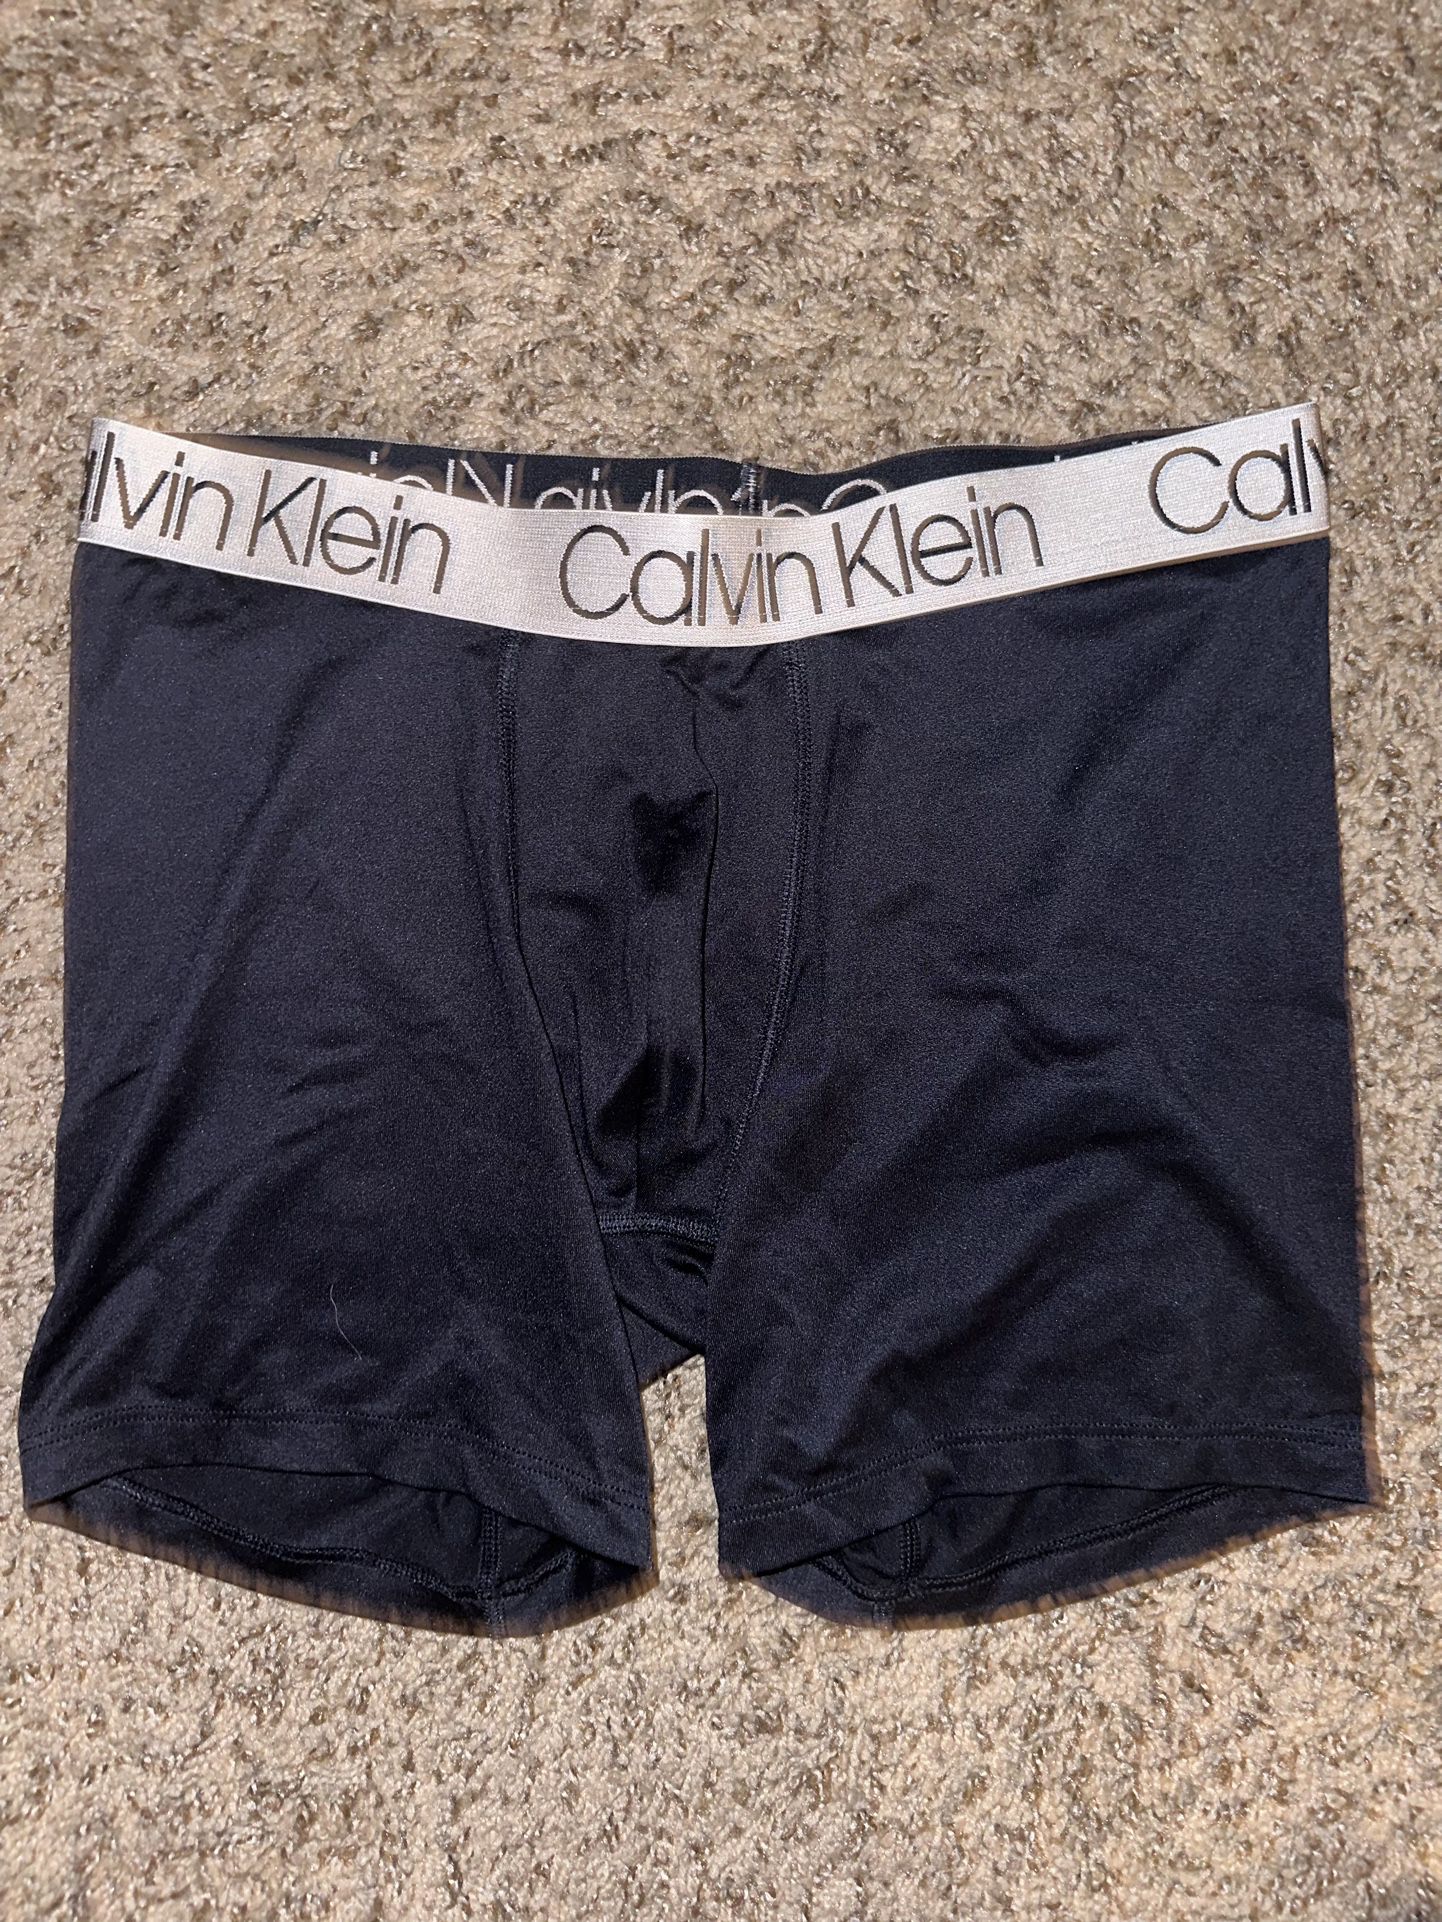 Used Calvin klein Briefs for Sale in Oregon City, OR - OfferUp